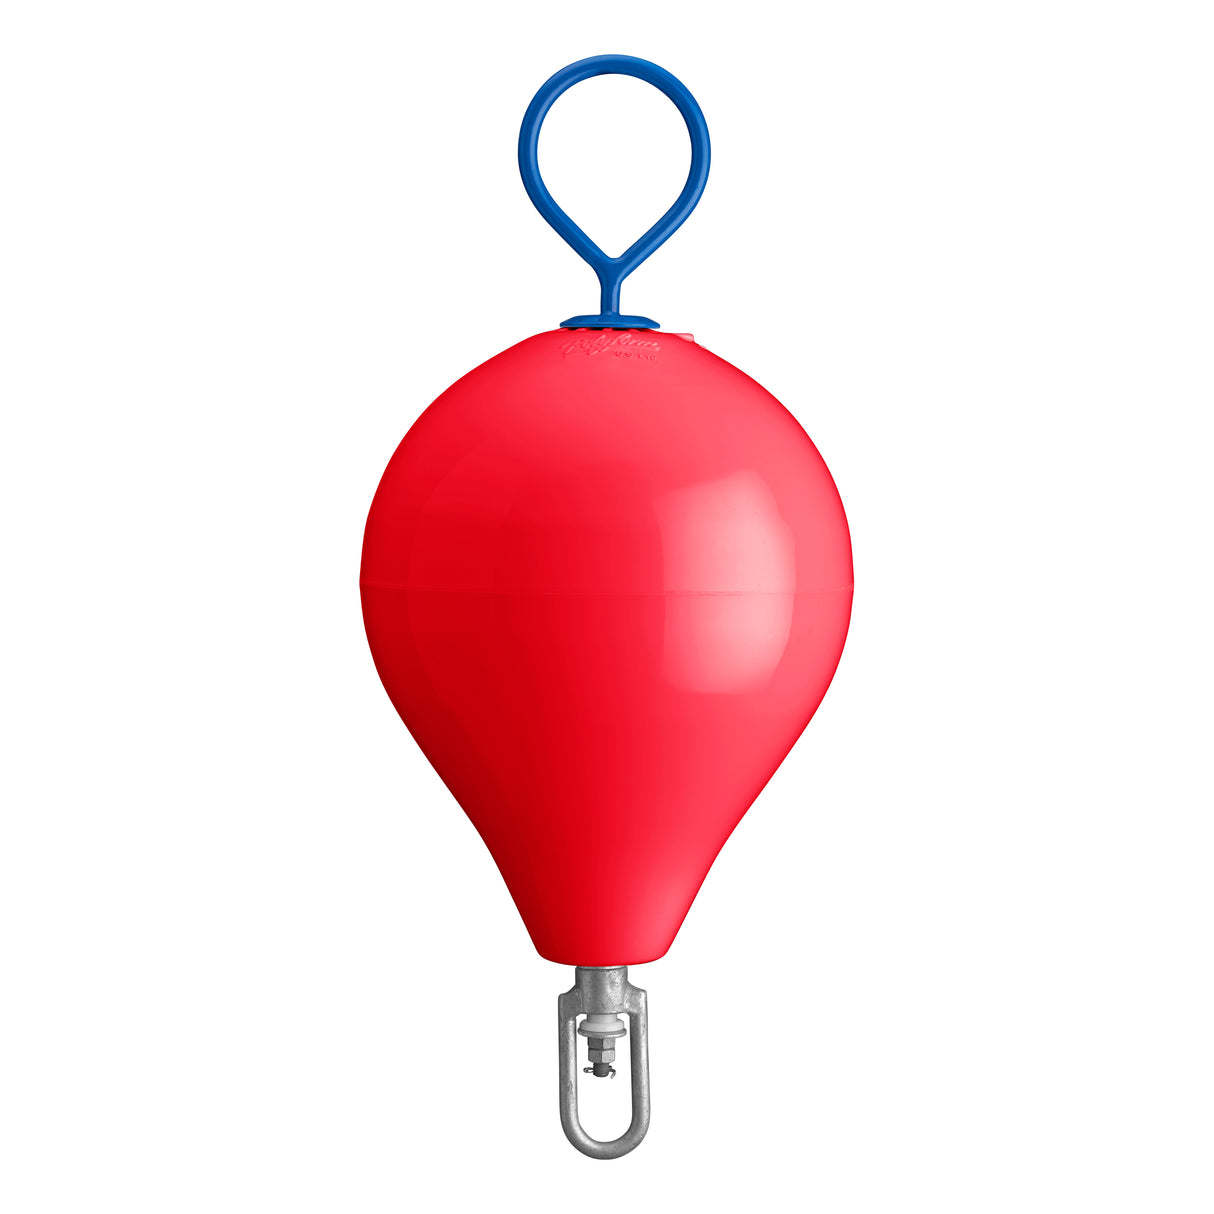 CM-2 Mooring Buoy with galvanized steel mooring iron and shackle, red